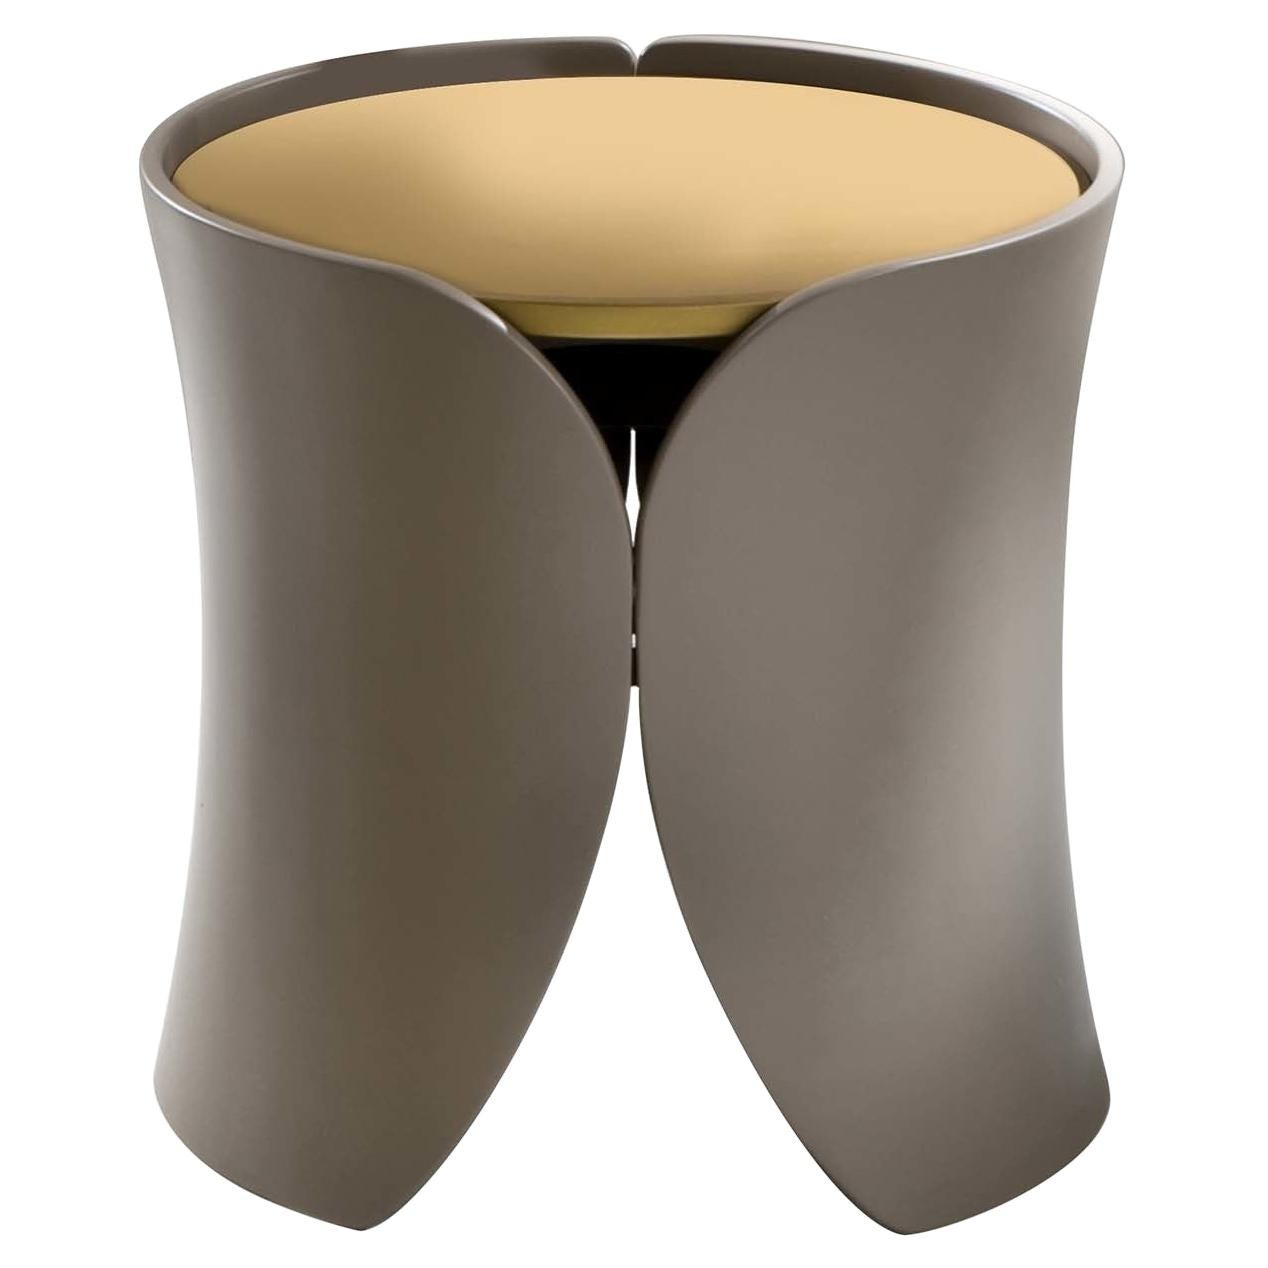 Laurameroni "Hugs" Rounded Low Table in Lacquered Wood